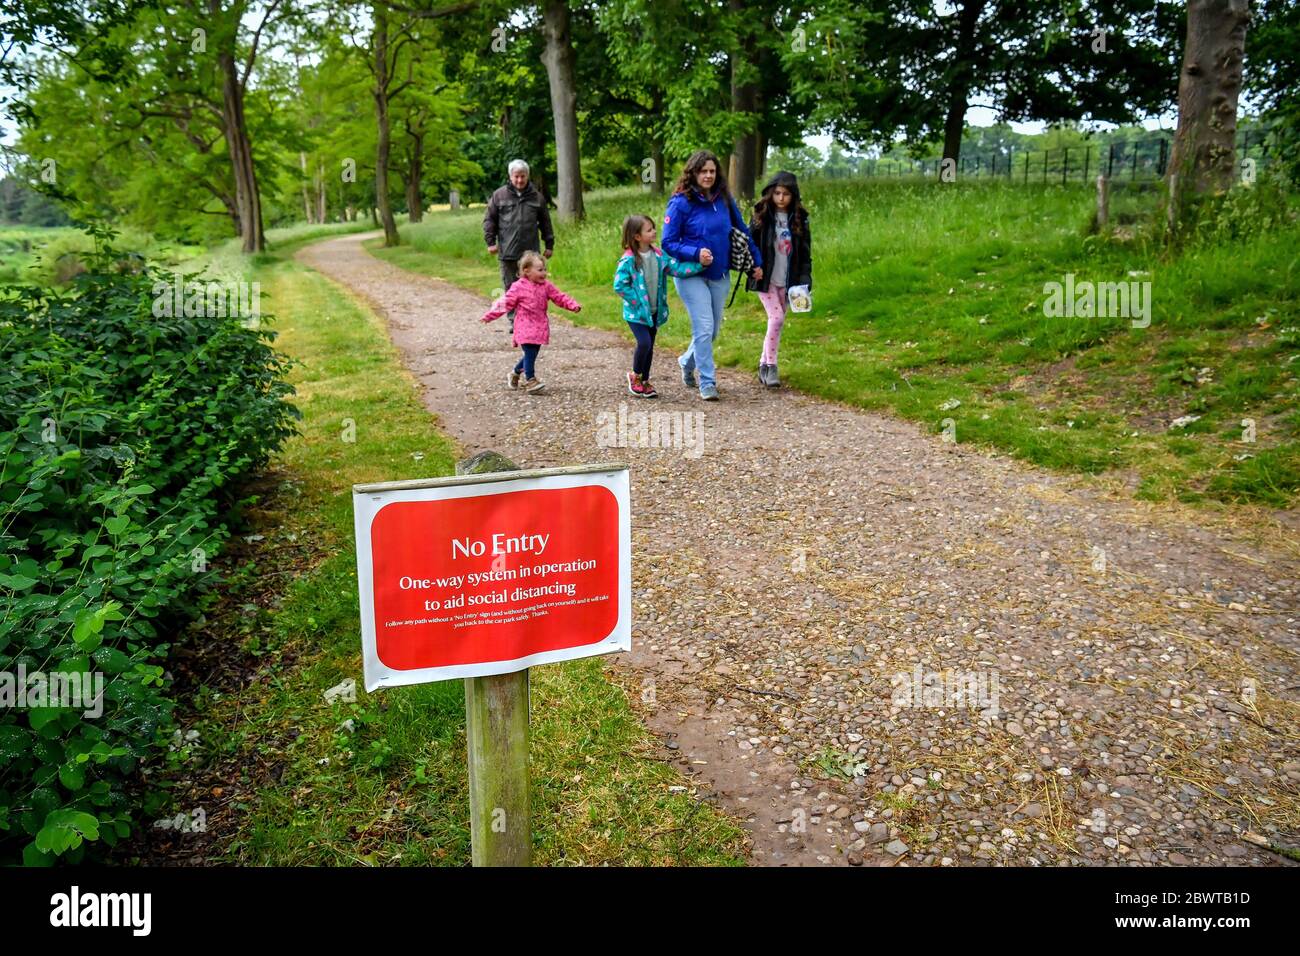 Visitors walk separately from others and stick to a one way system during country walks at Attingham Park in Shropshire, on the first day of the reopening of National Trust gardens and parklands following the coronavirus outbreak. National Trust is phasing reopening of gardens and parklands in England and Northern Ireland with advance booking needed to limit numbers and maintain public safety. Stock Photo